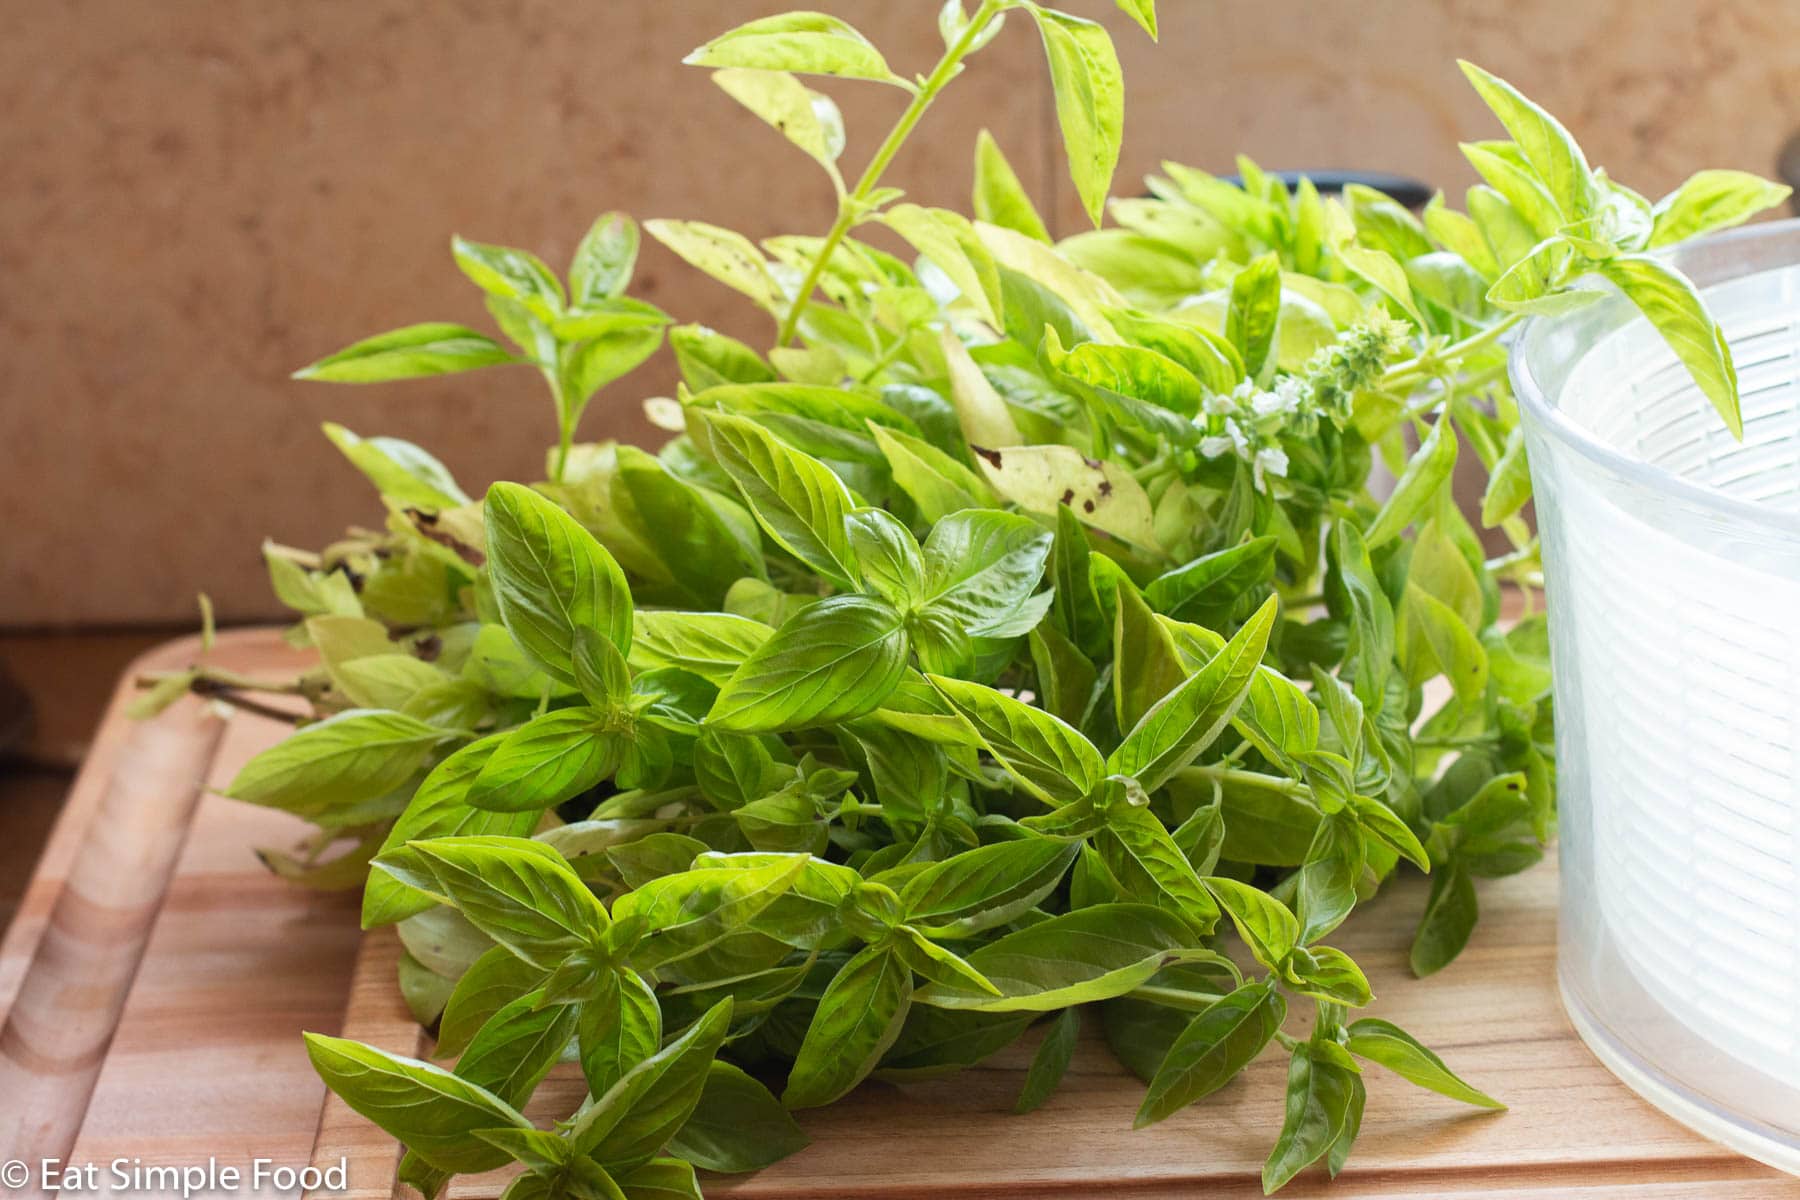 Lots of garden fresh basil sprigs on a wood cutting board with a salad spinner.